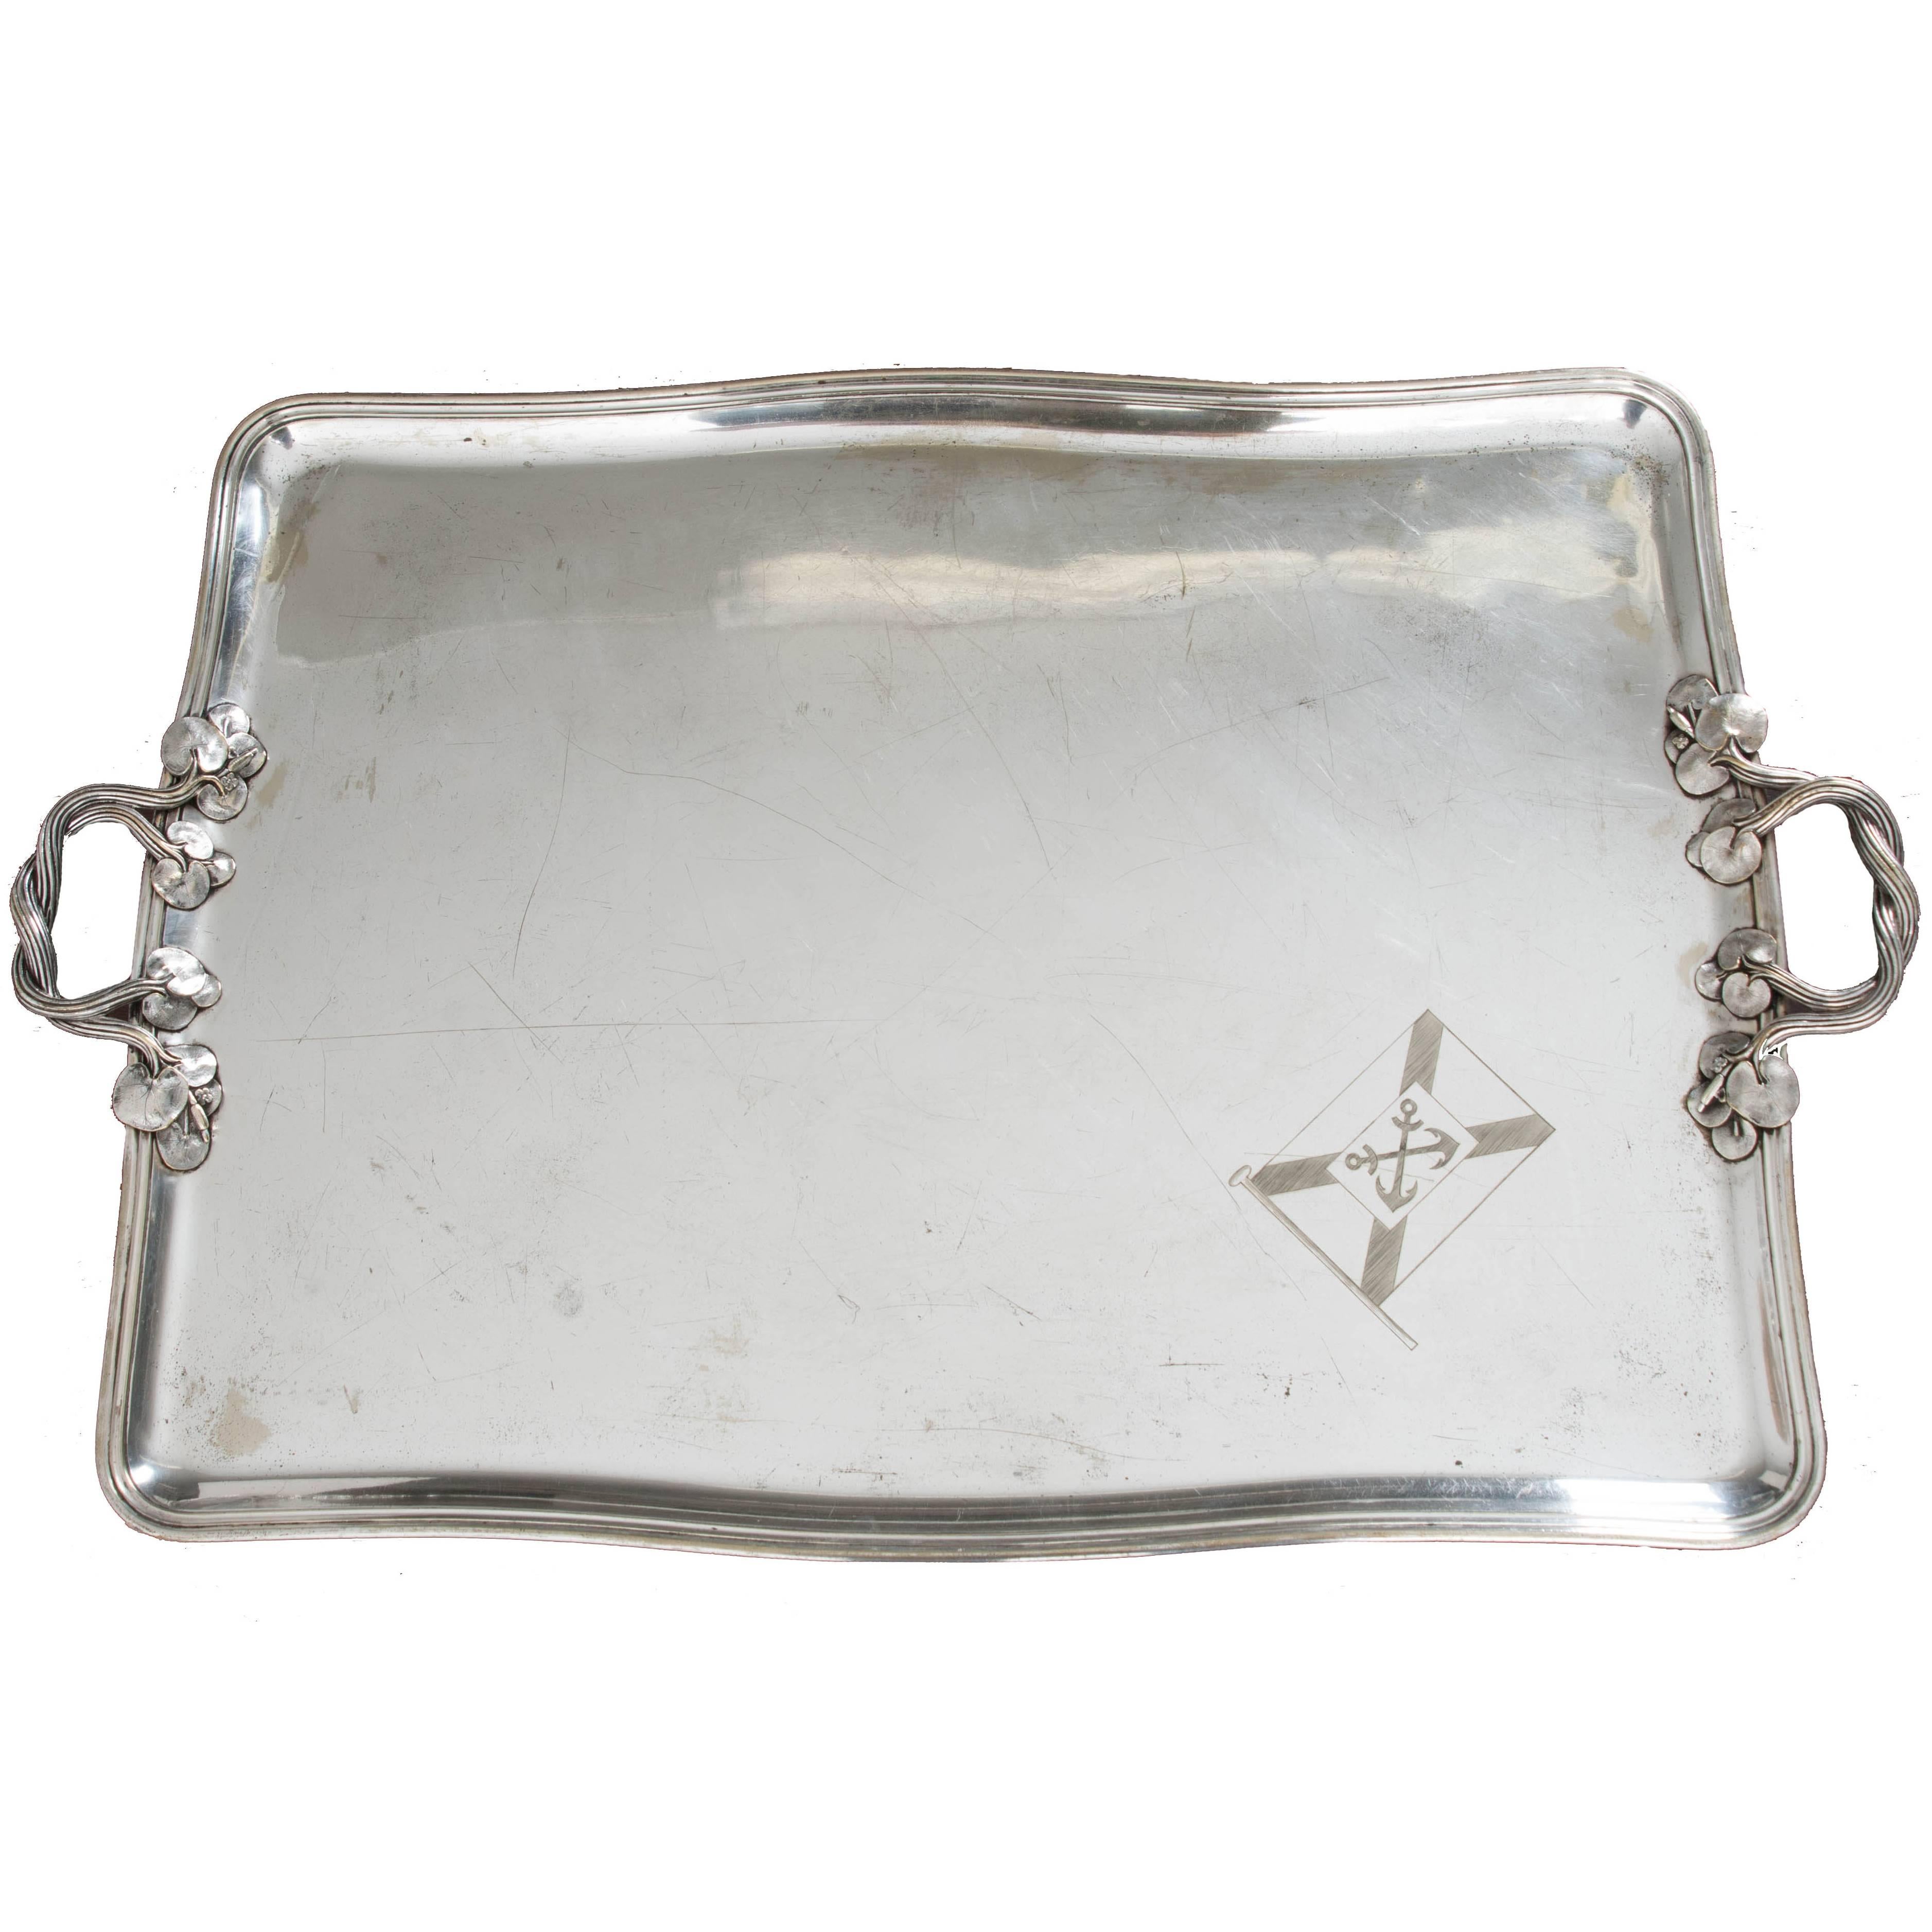 Early 20th Century Art Nouveau Silver Serving Tray